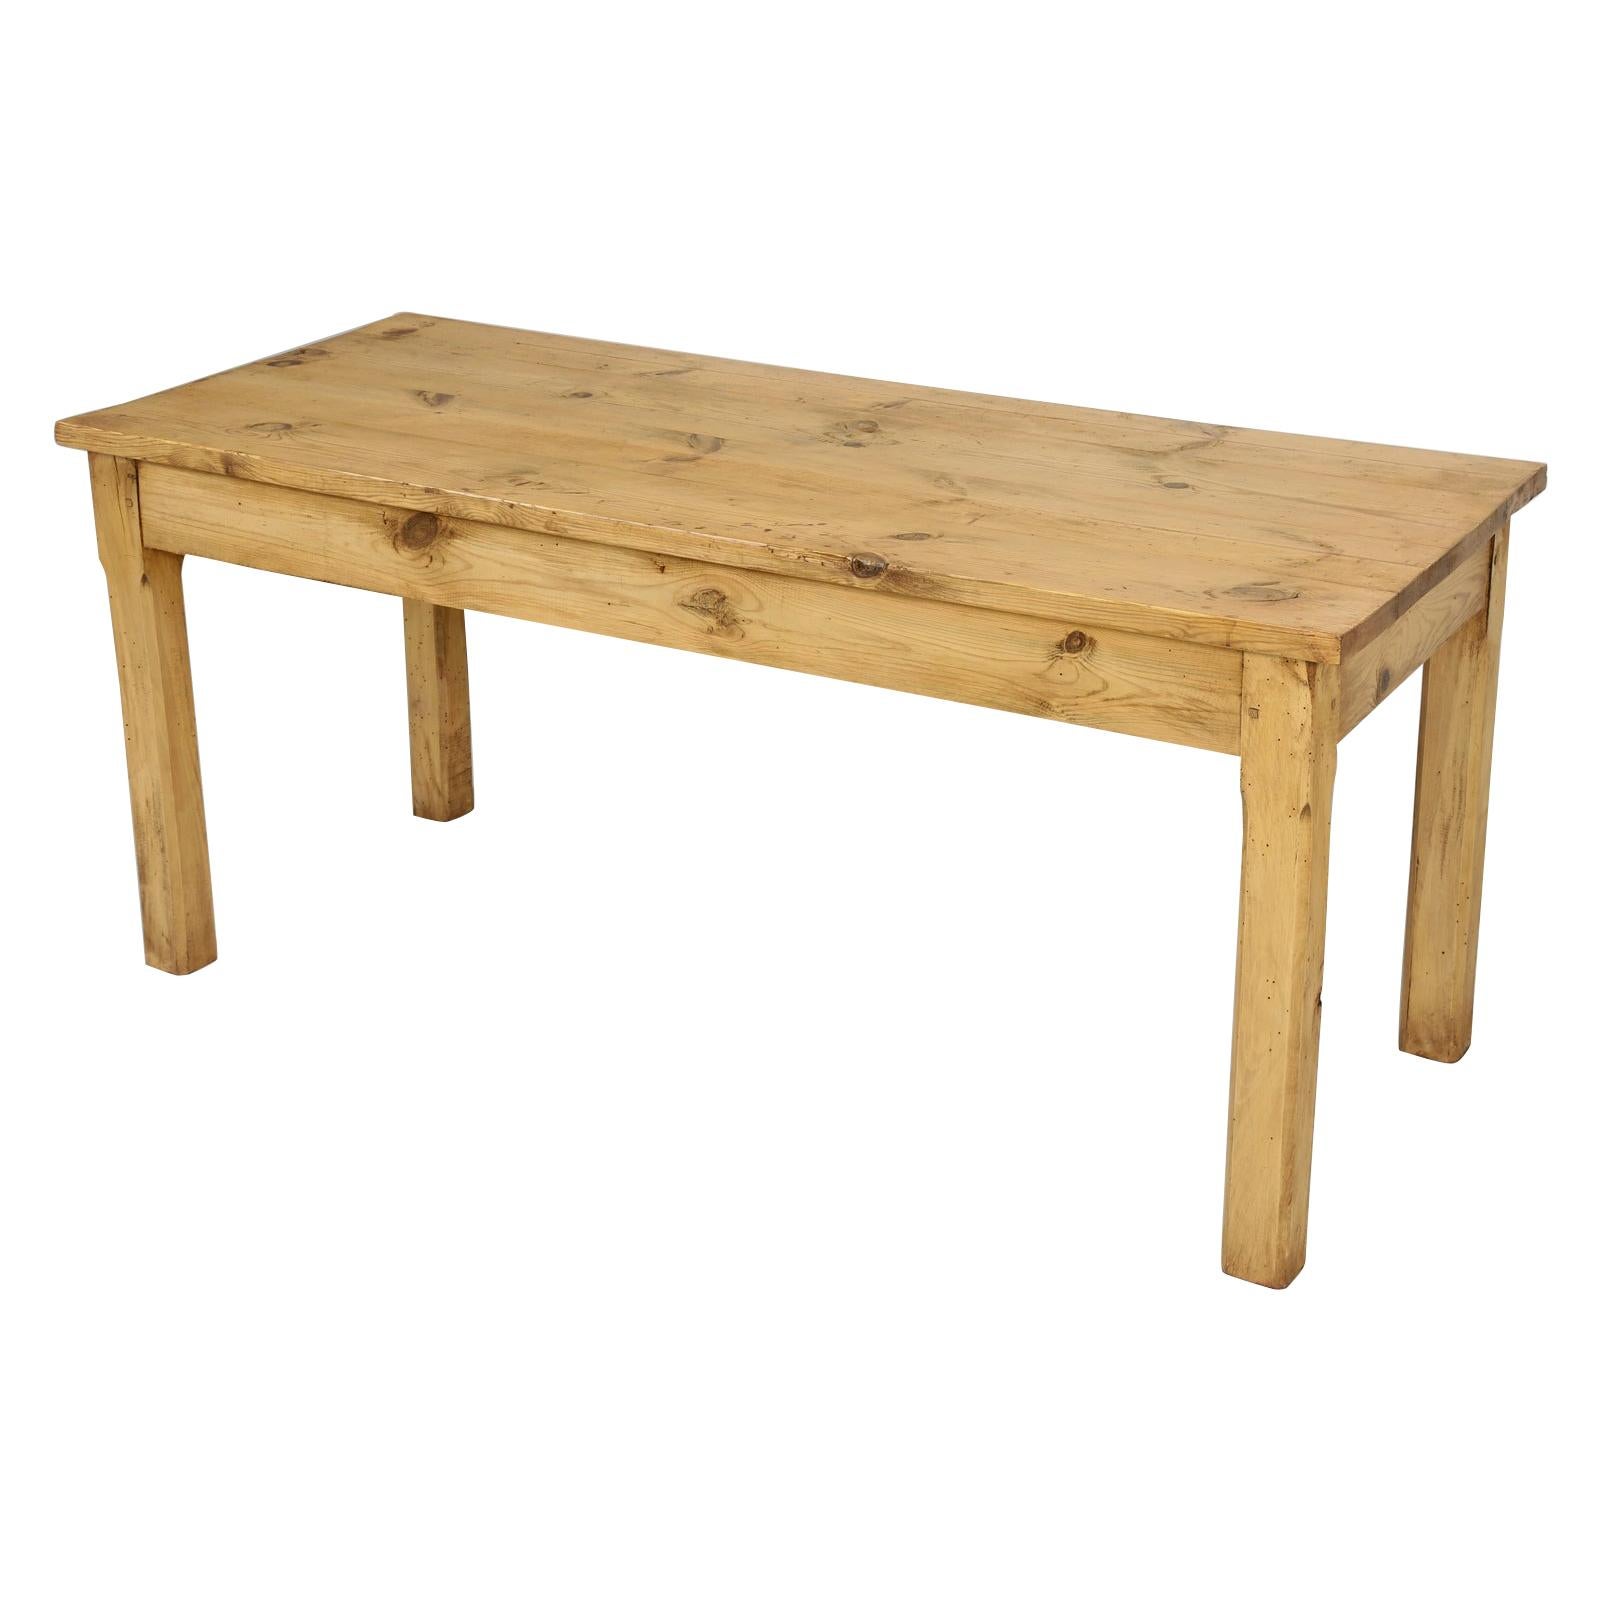 Old Pine Farm Table from France, Restored with a Traditional Beeswax Finish